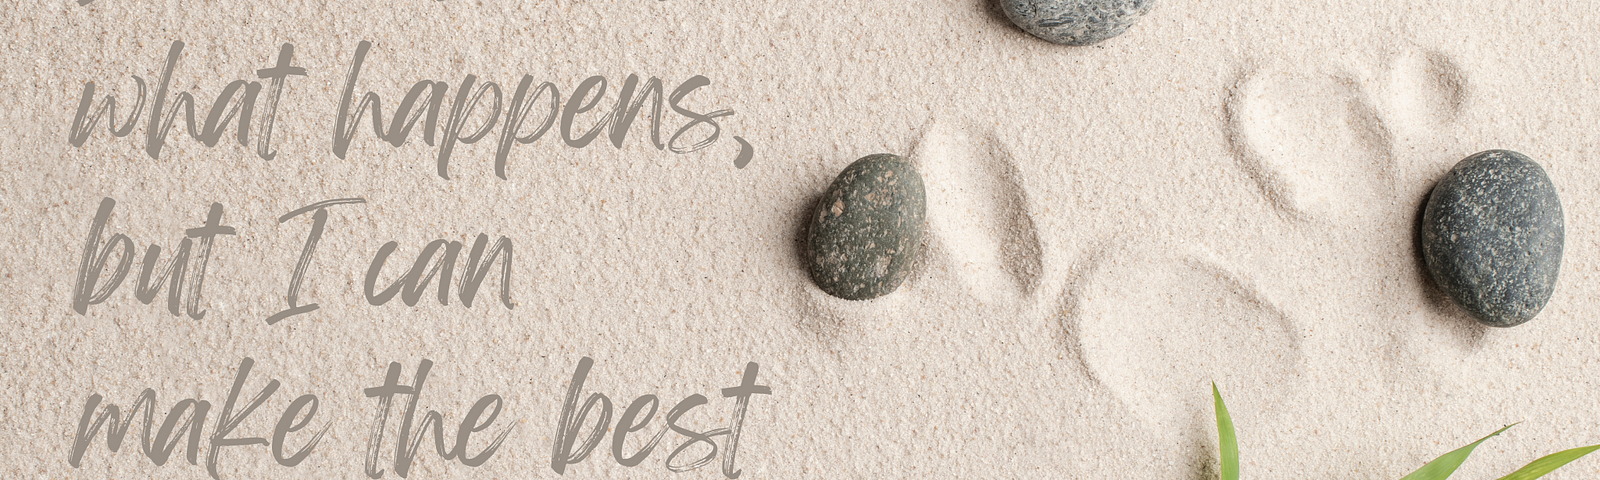 background of sand with 3 grey rocks on right and indents in the sand from rocks being moved. In lower right corner is a green leaf. On left are the words: I cannot control what happens, but I can make the best choices for me.